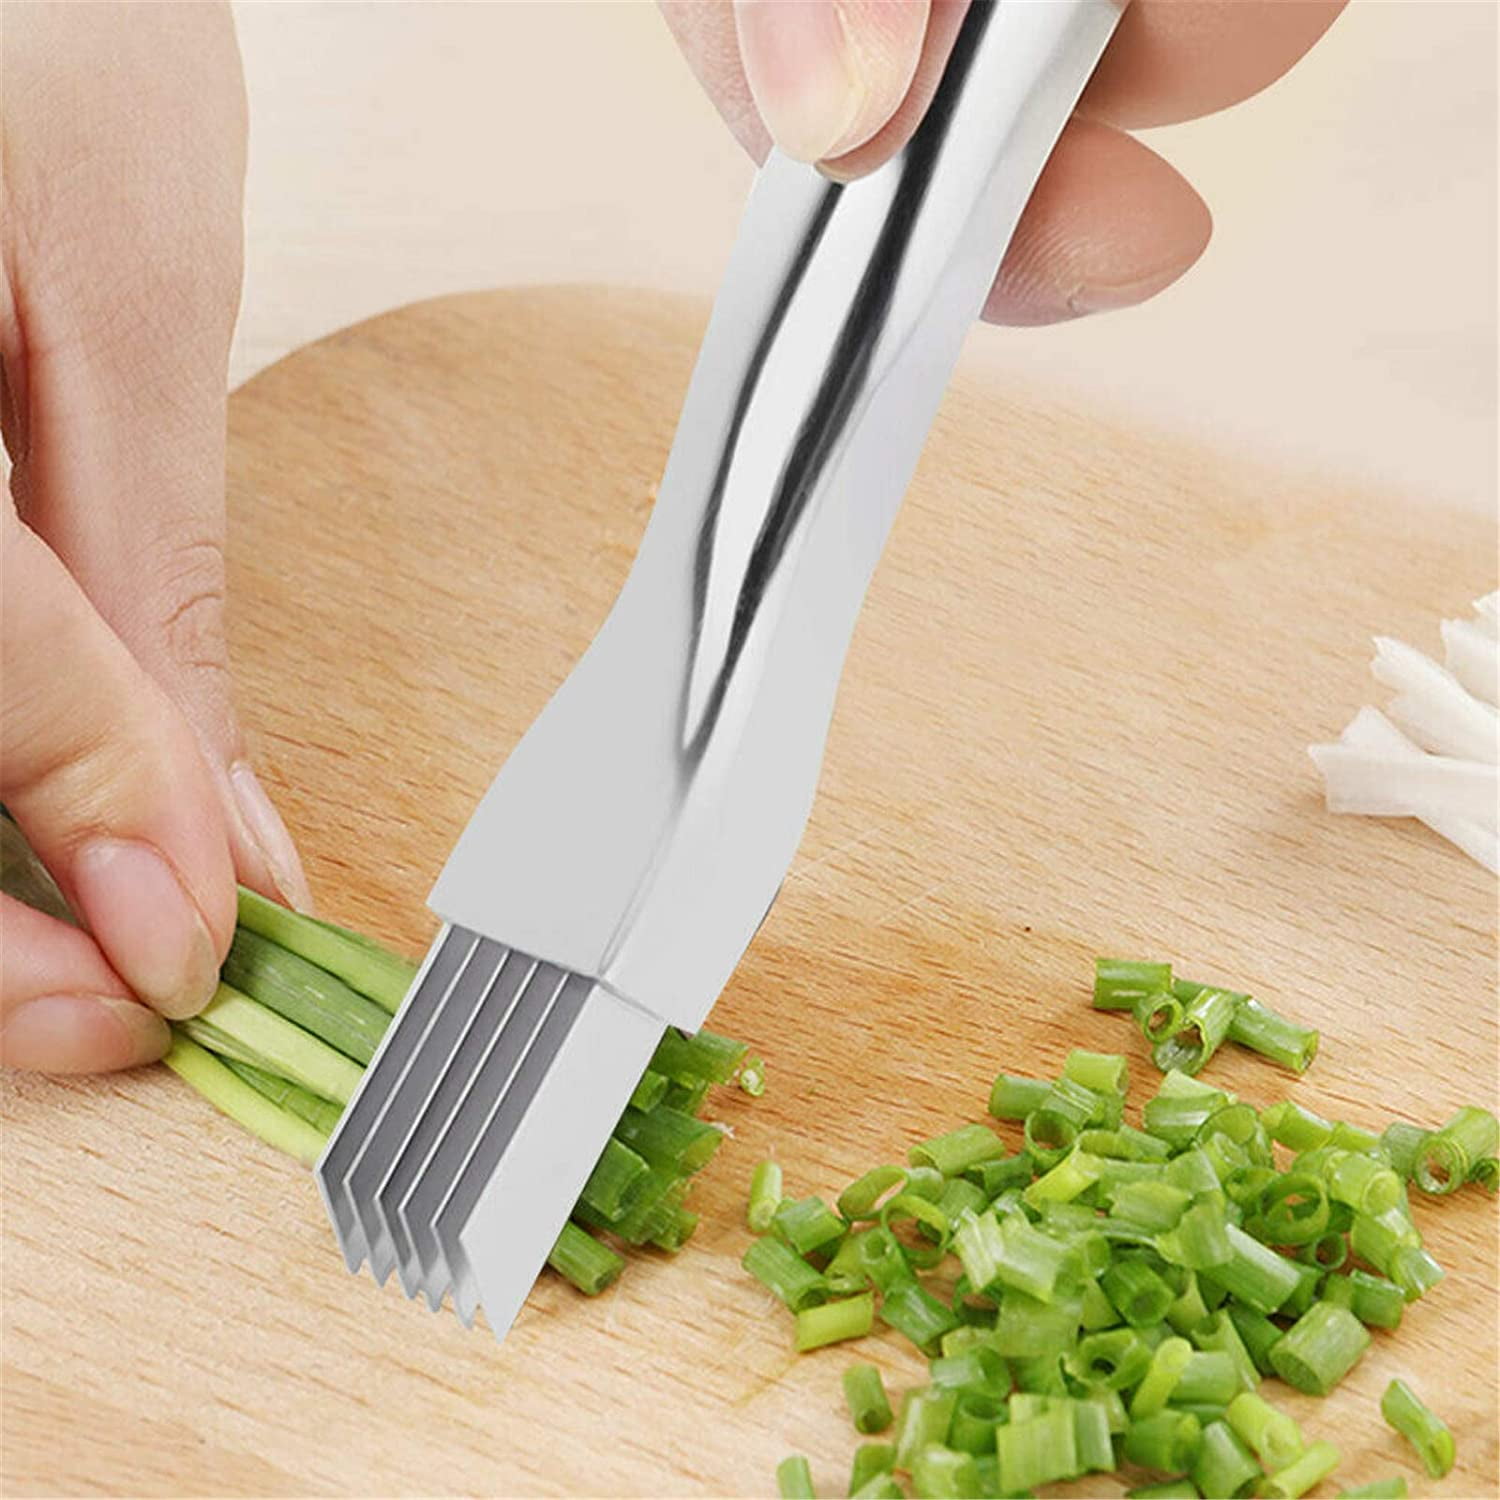 NOGIS Kitchen Shred Silk The Knife, Stainless Steel Scallion